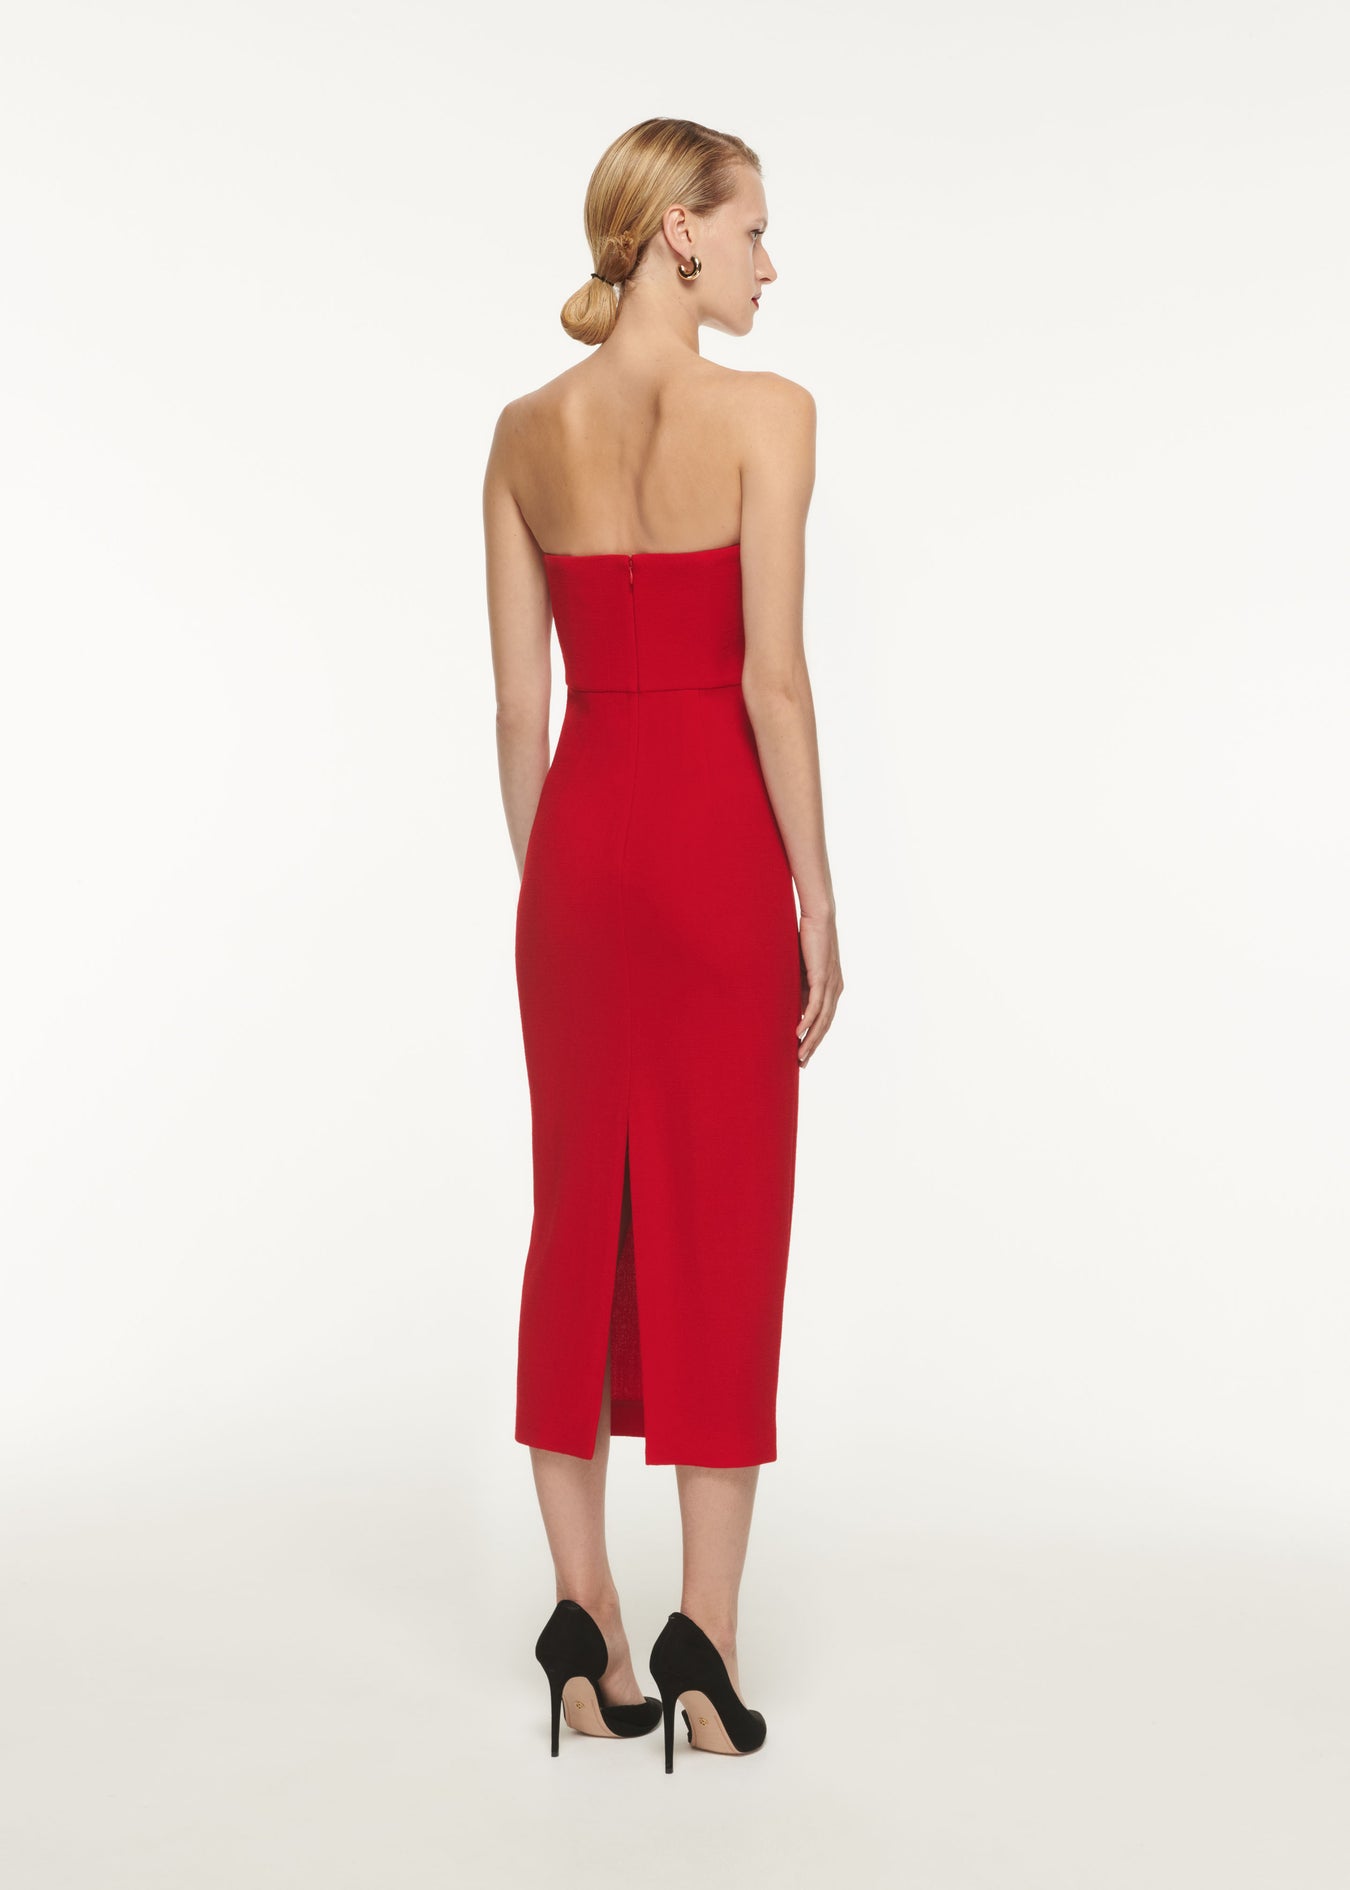 The back of a woman wearing the Asymmetric Wool Crepe Midi Dress